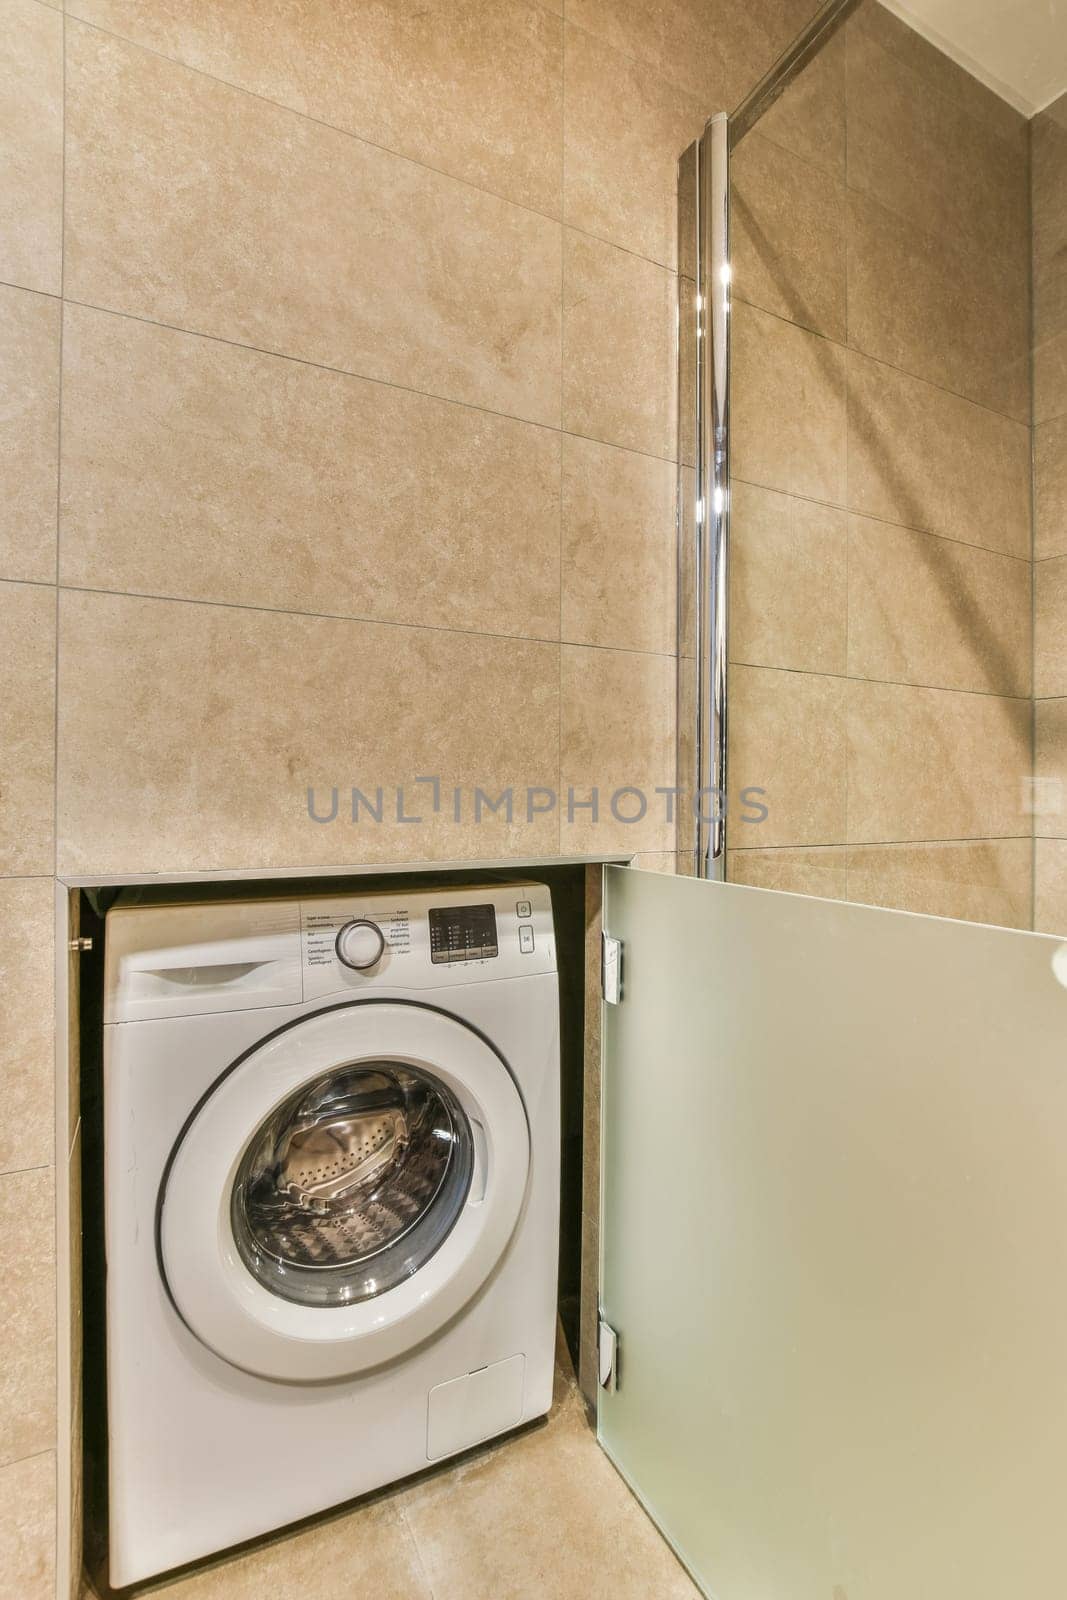 a washer and dryer in a bathroom door by casamedia